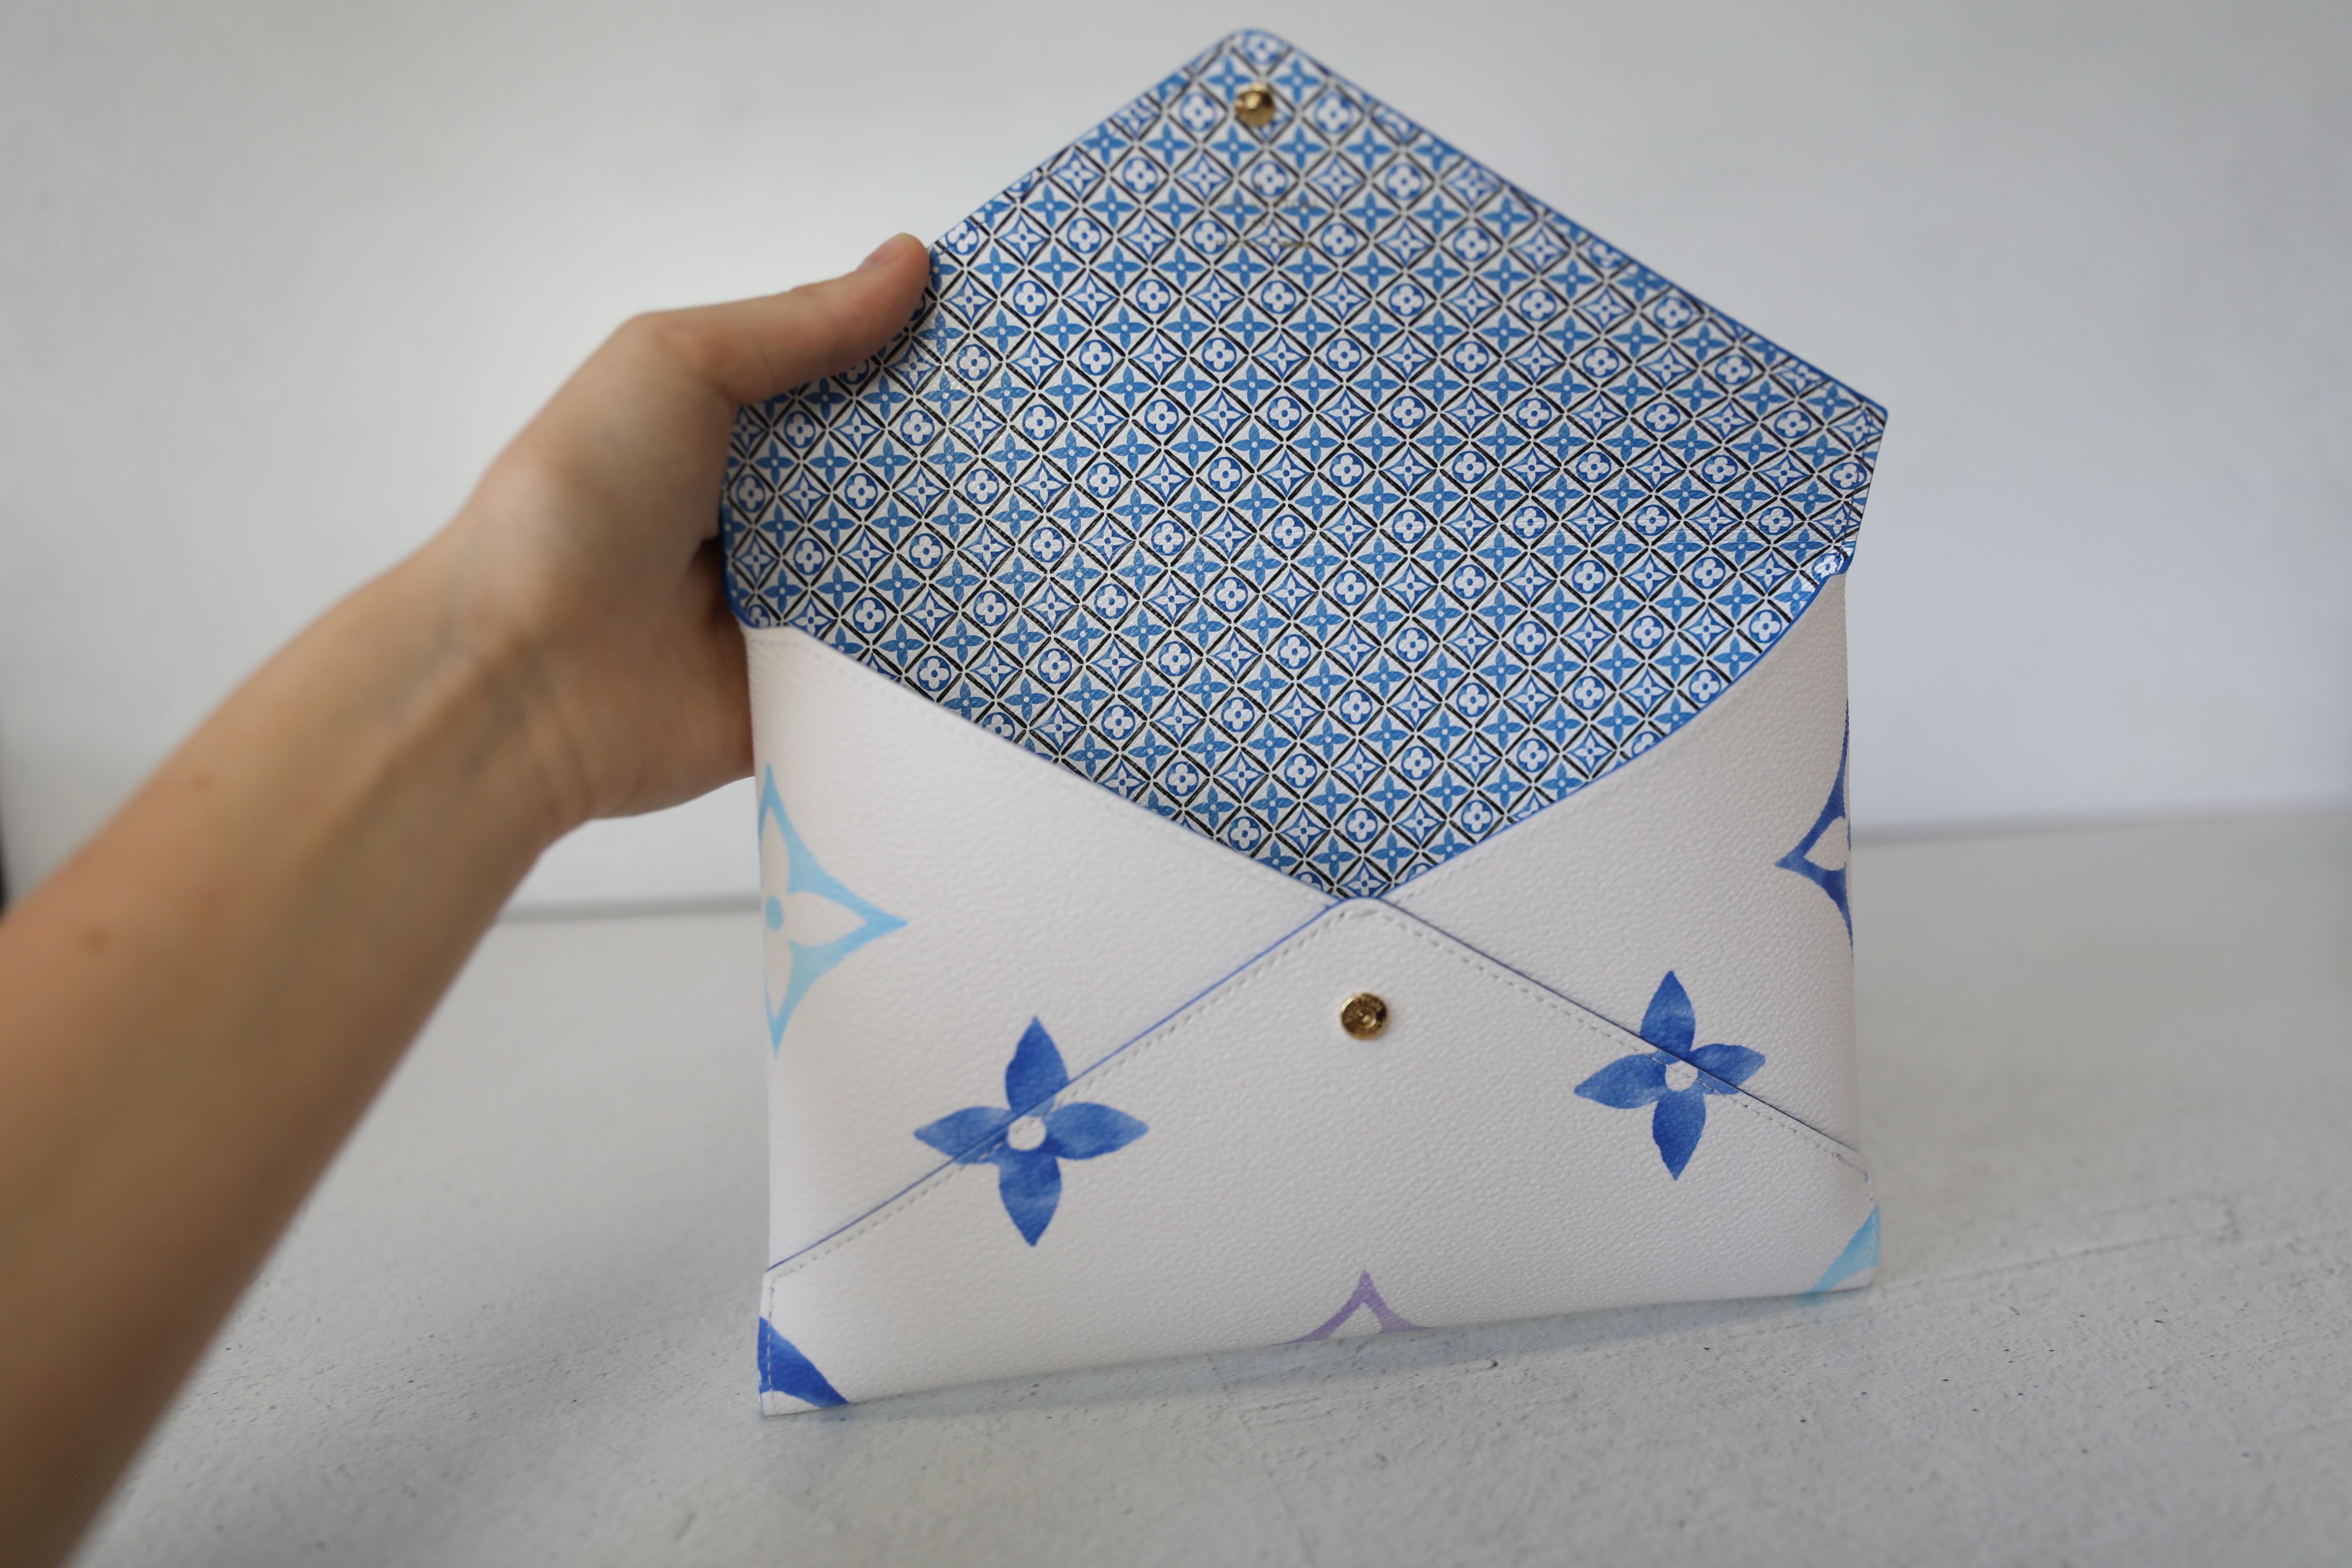 Louis Vuitton Kirigami Pouch Large, Blue and White, New in Box WA001